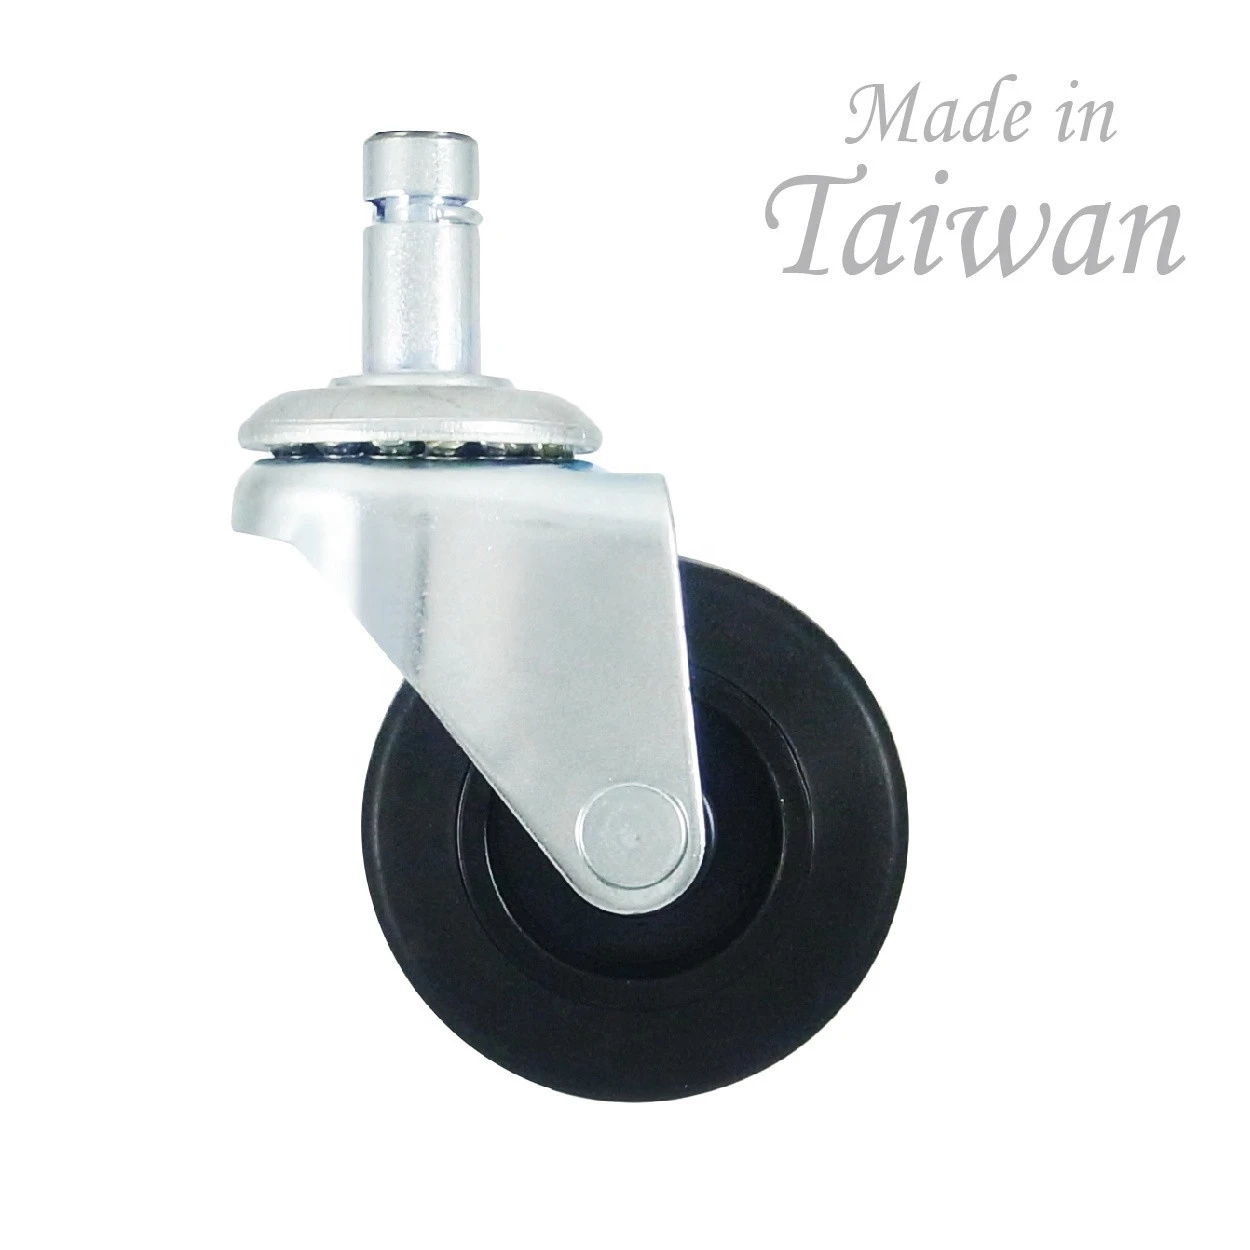 2 Inch Rubber Swivel TPR Casters For Kitchen Hardwood Floors Furniture